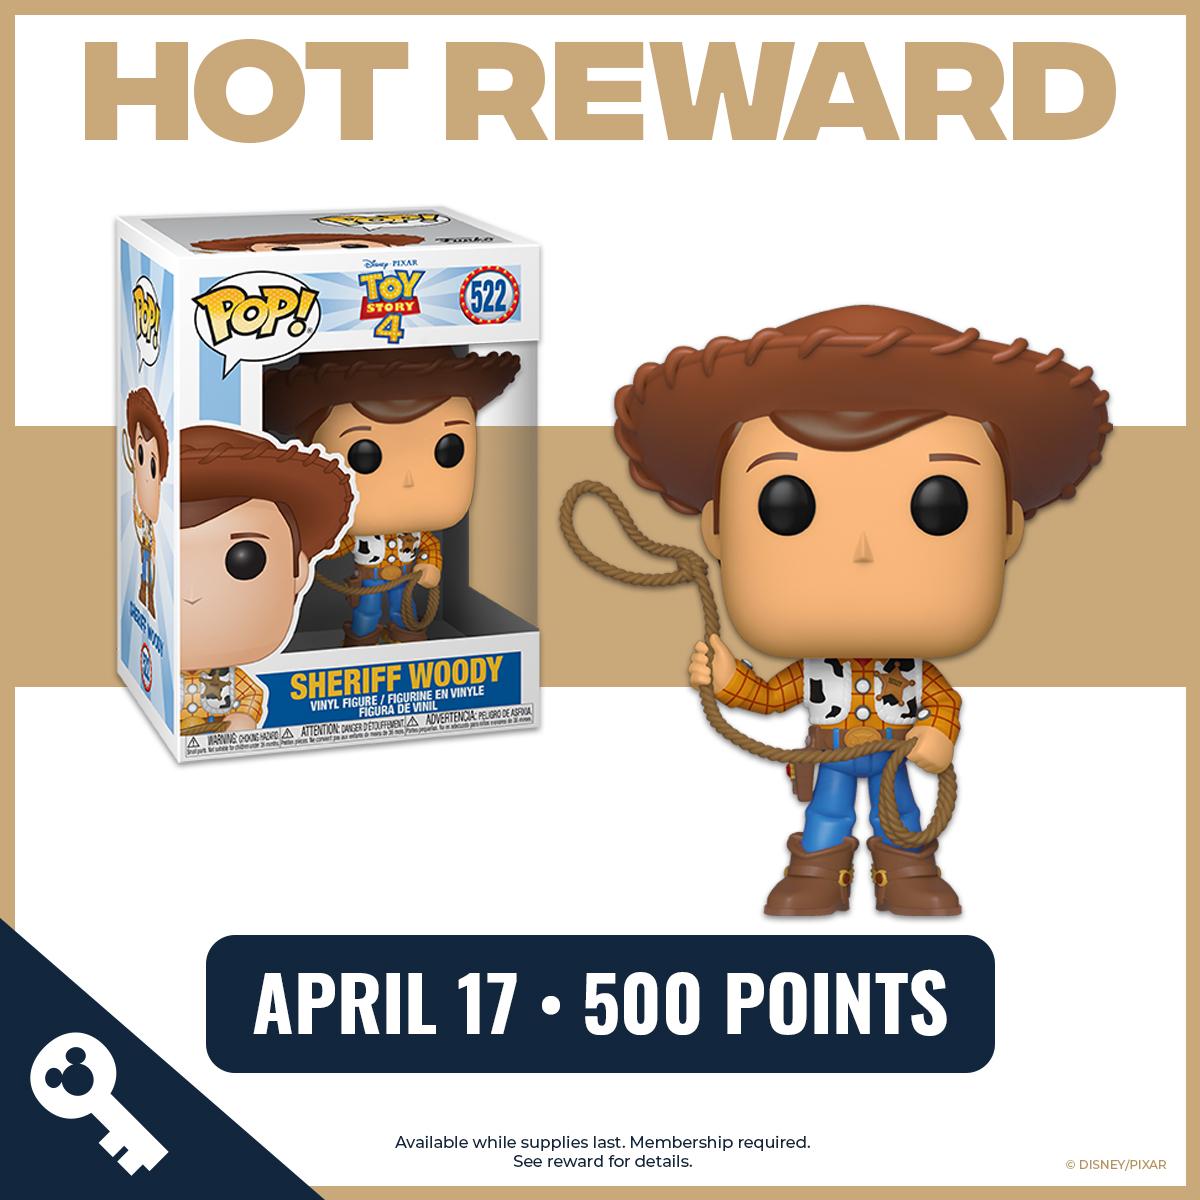 This week’s Hot Reward is our favorite deputy! Visit di.sn/6017wAF1N this Wednesday at 9AM PT for full details on this Disney and Pixar's @ToyStory 4 Sheriff Woody Pop! and more rewards.